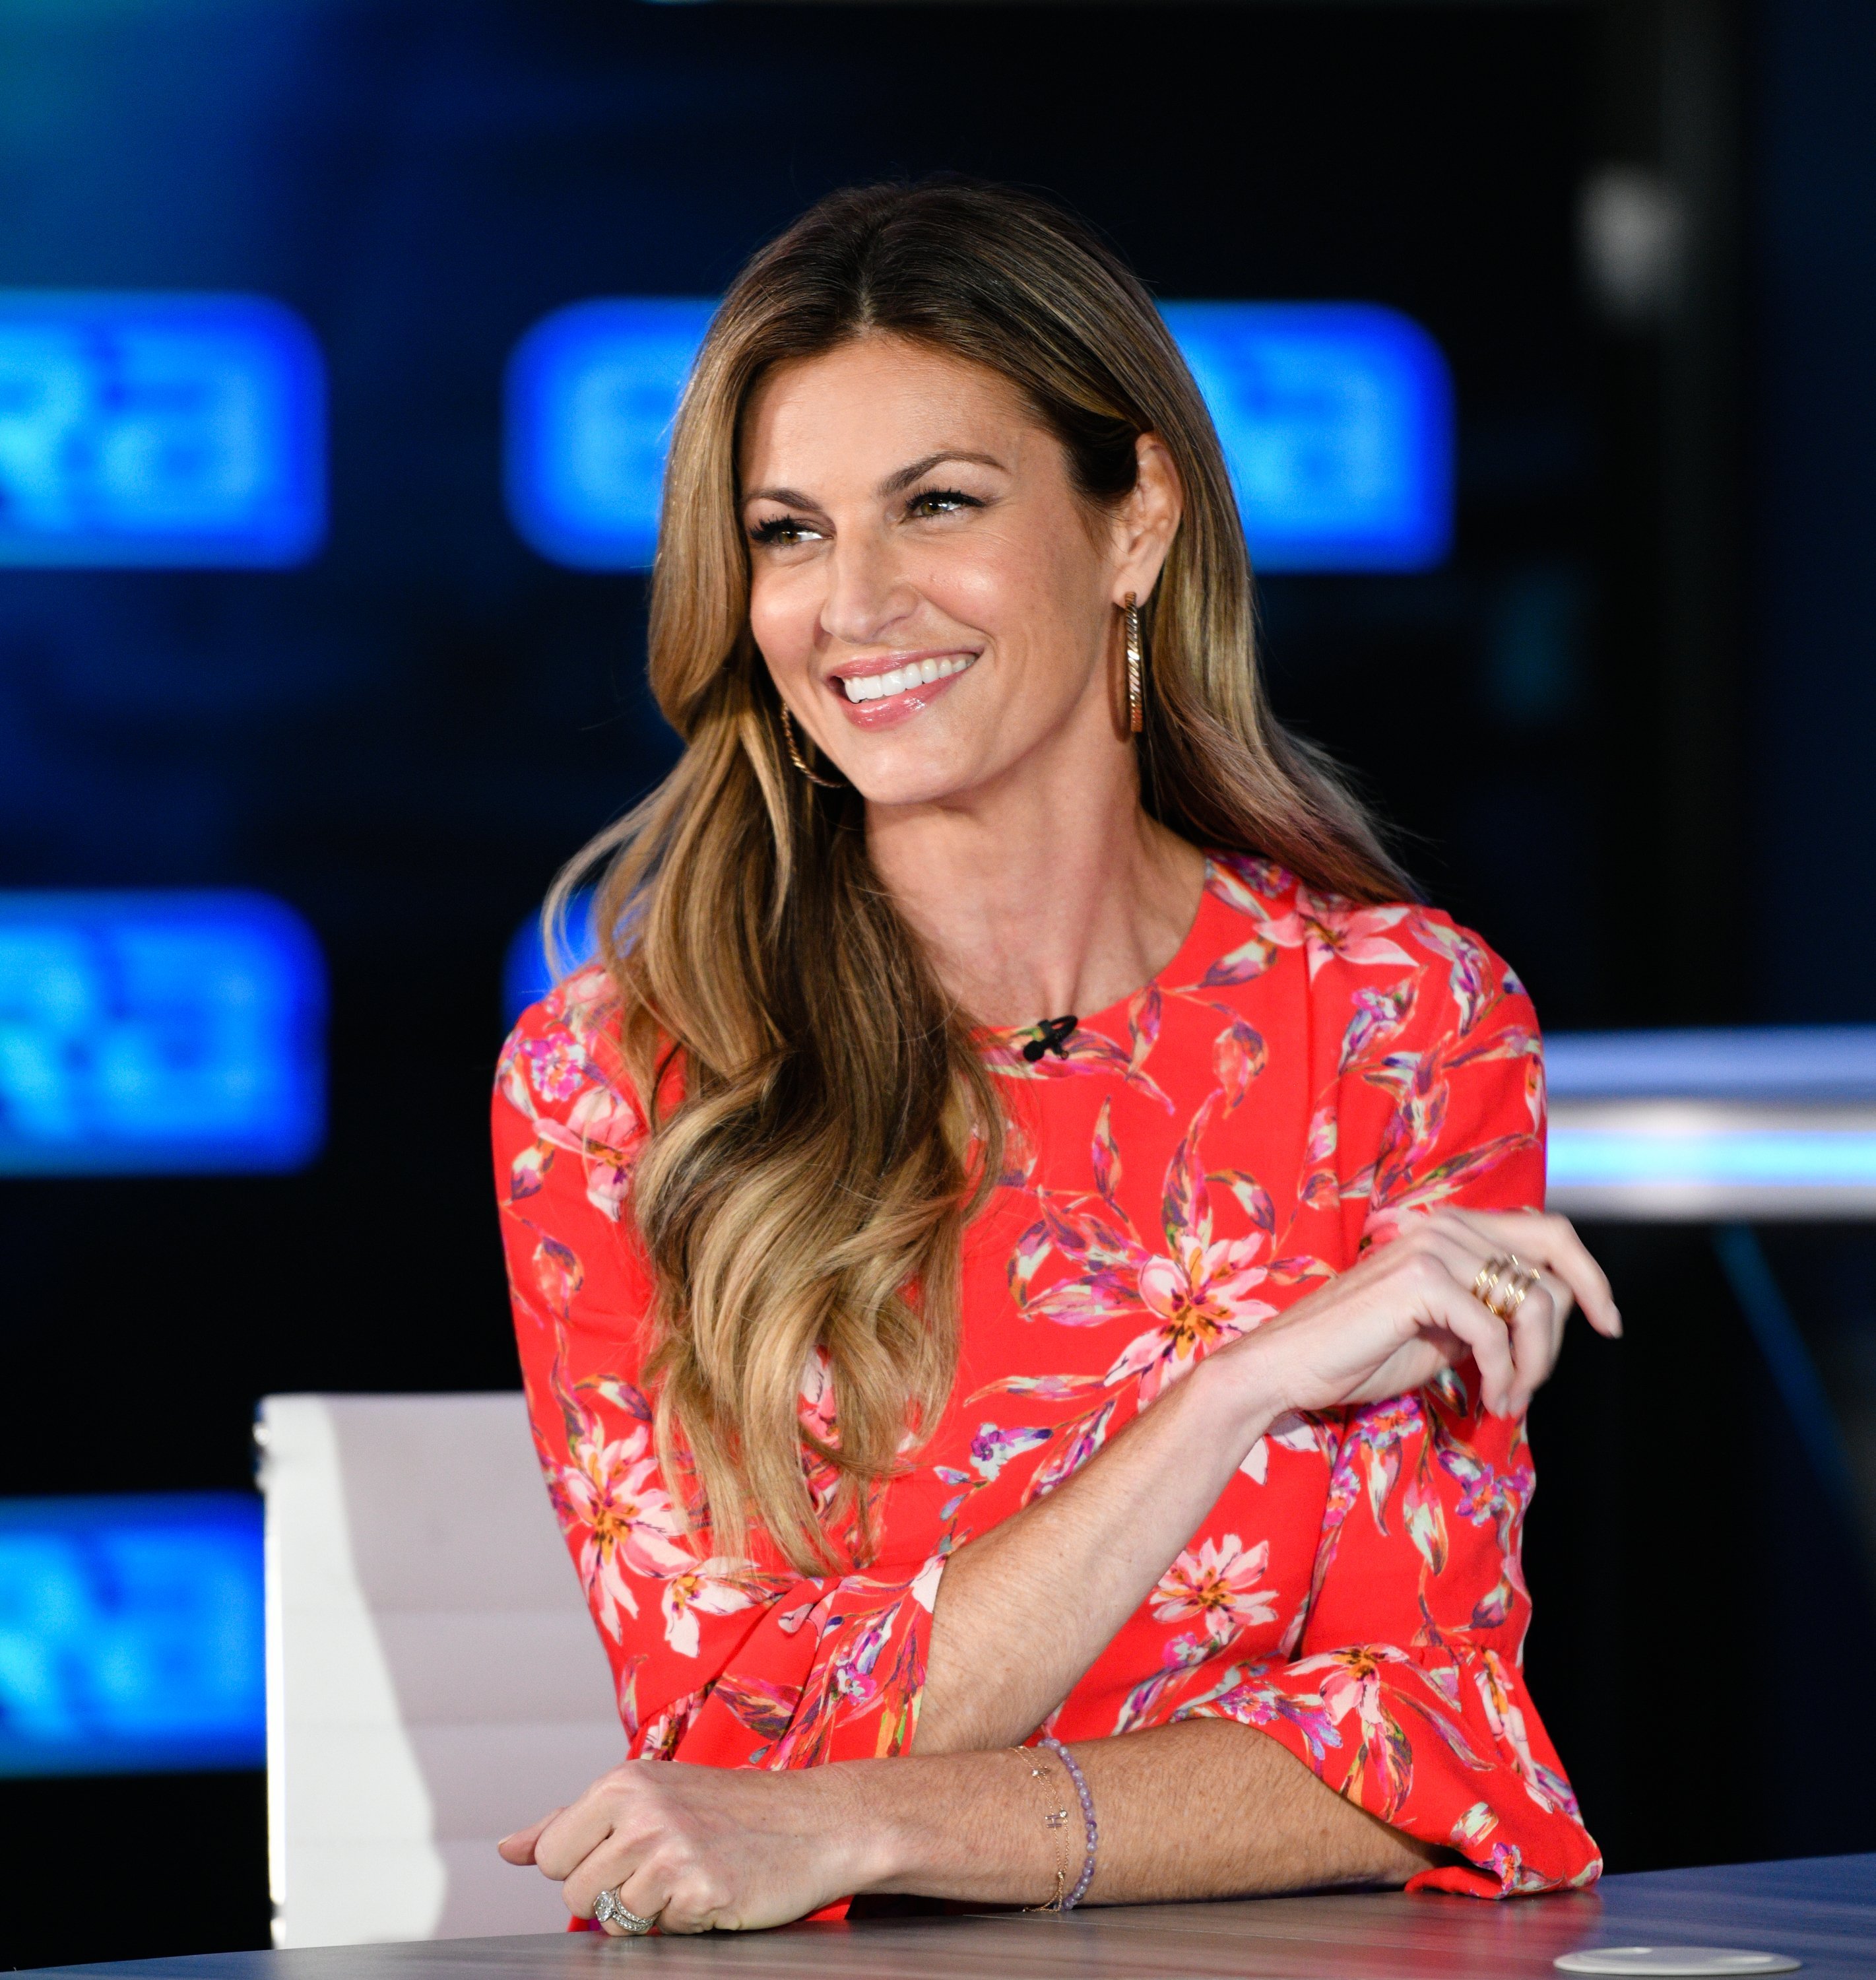 Erin Andrews visits "Extra" at Burbank Studios on October 01, 2019 | Photo: GettyImages